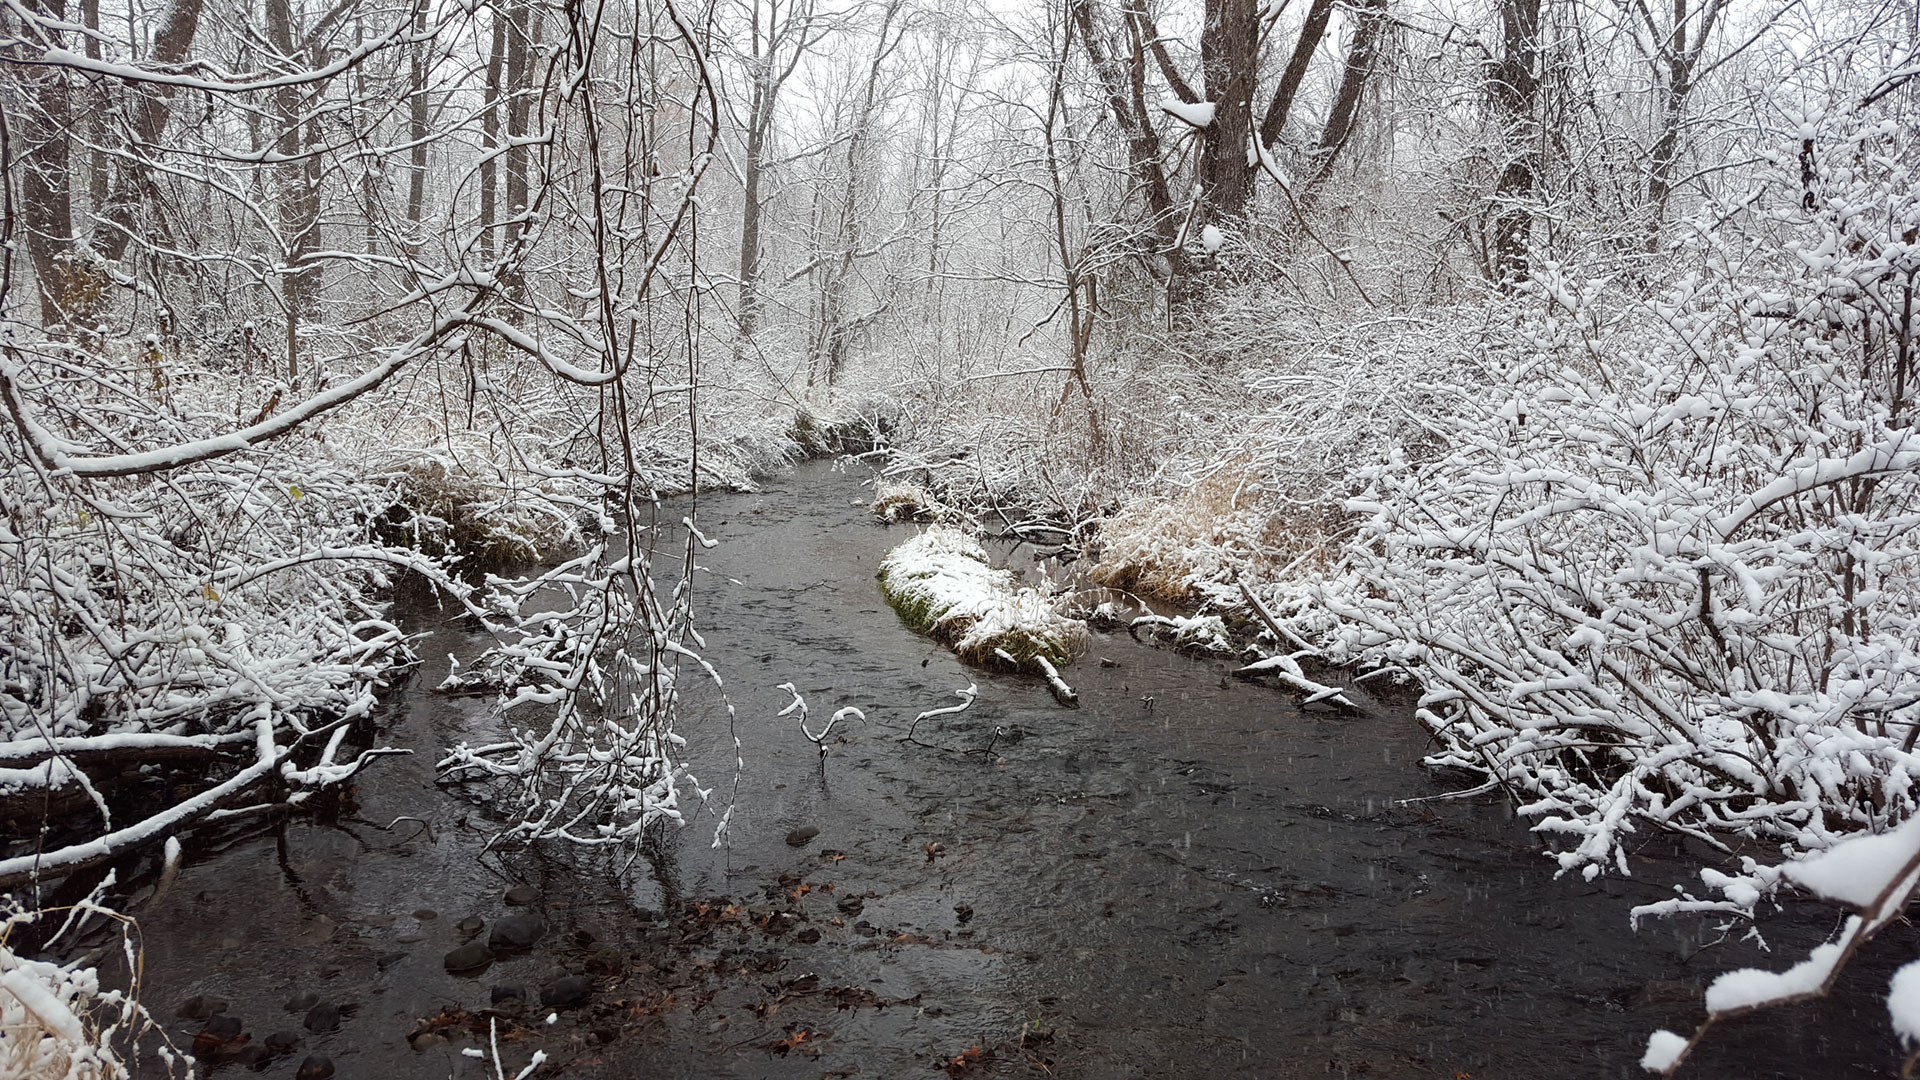 Get outdoors this winter in Oakland County